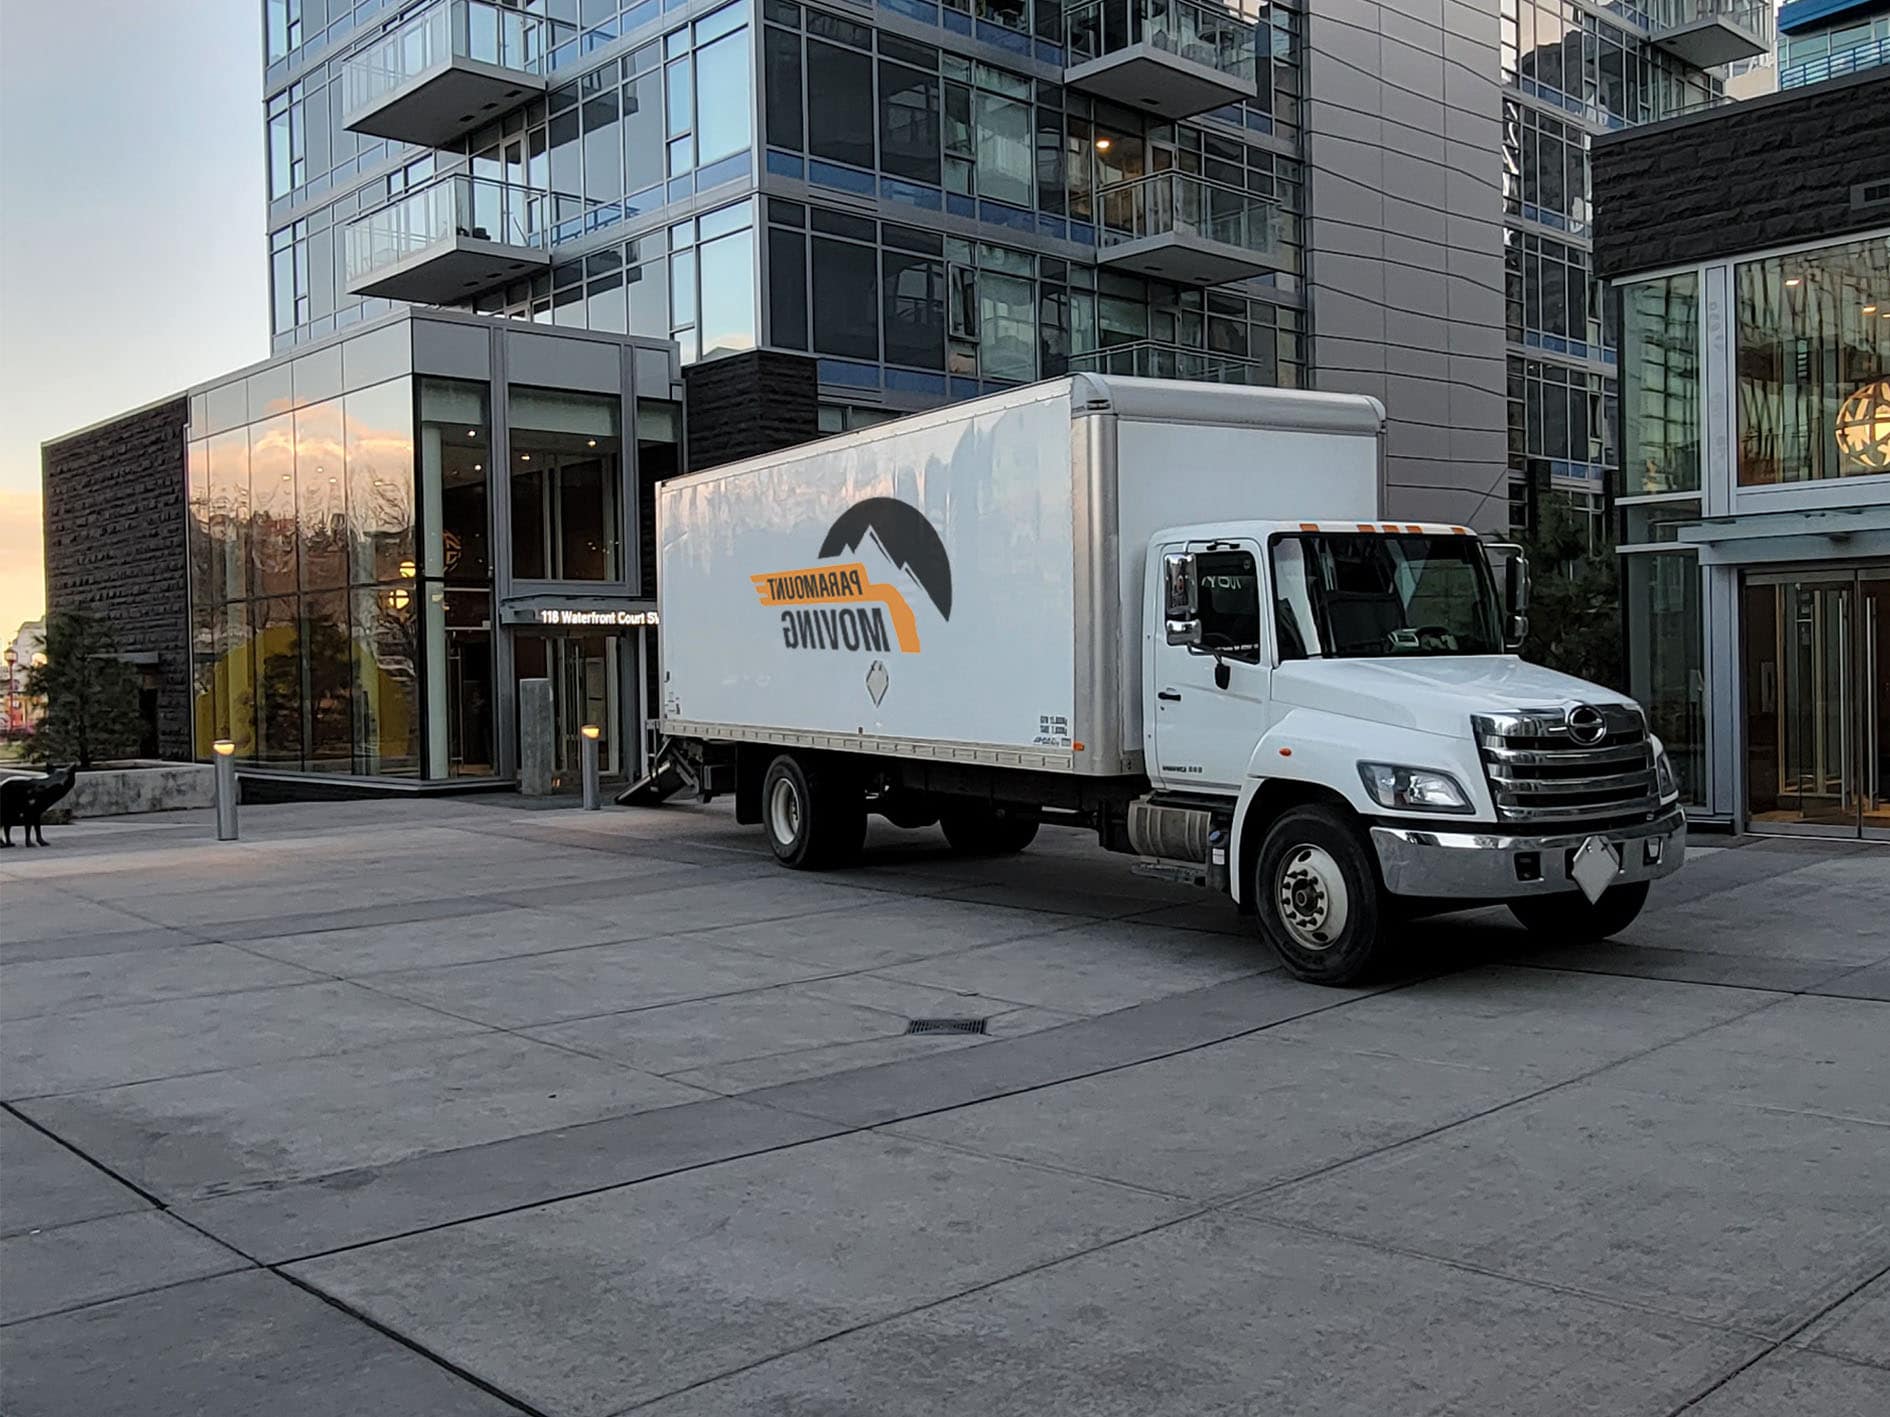 Truck of Affordable Movers in Calgary ready for unload